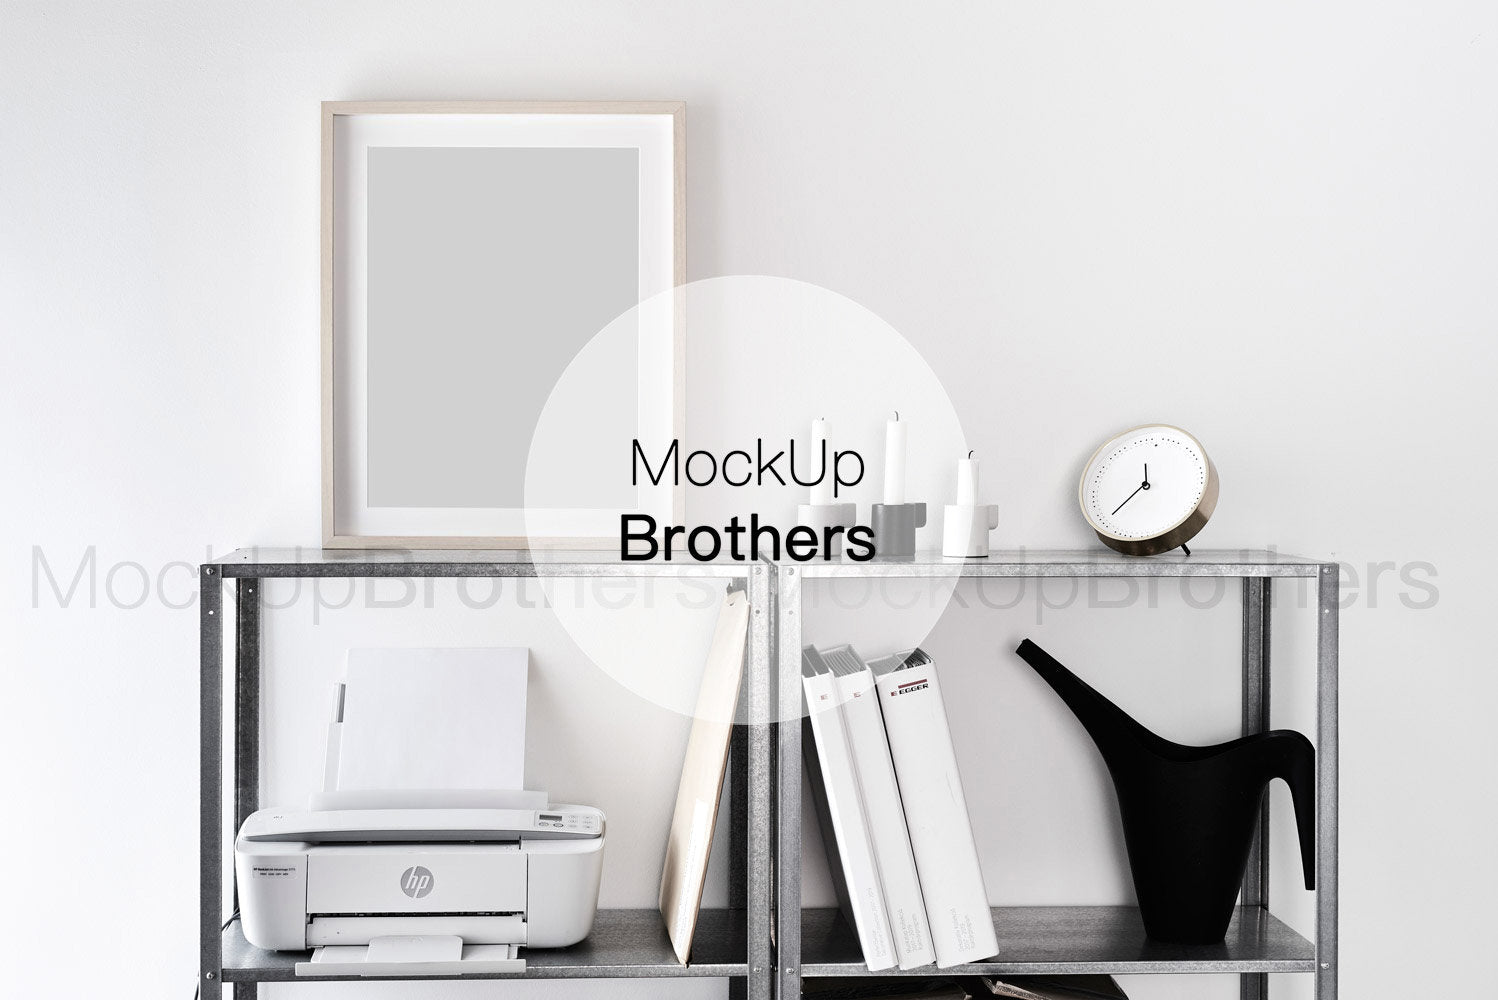 10x13 inch frame mockup in office by Mockup Brothers